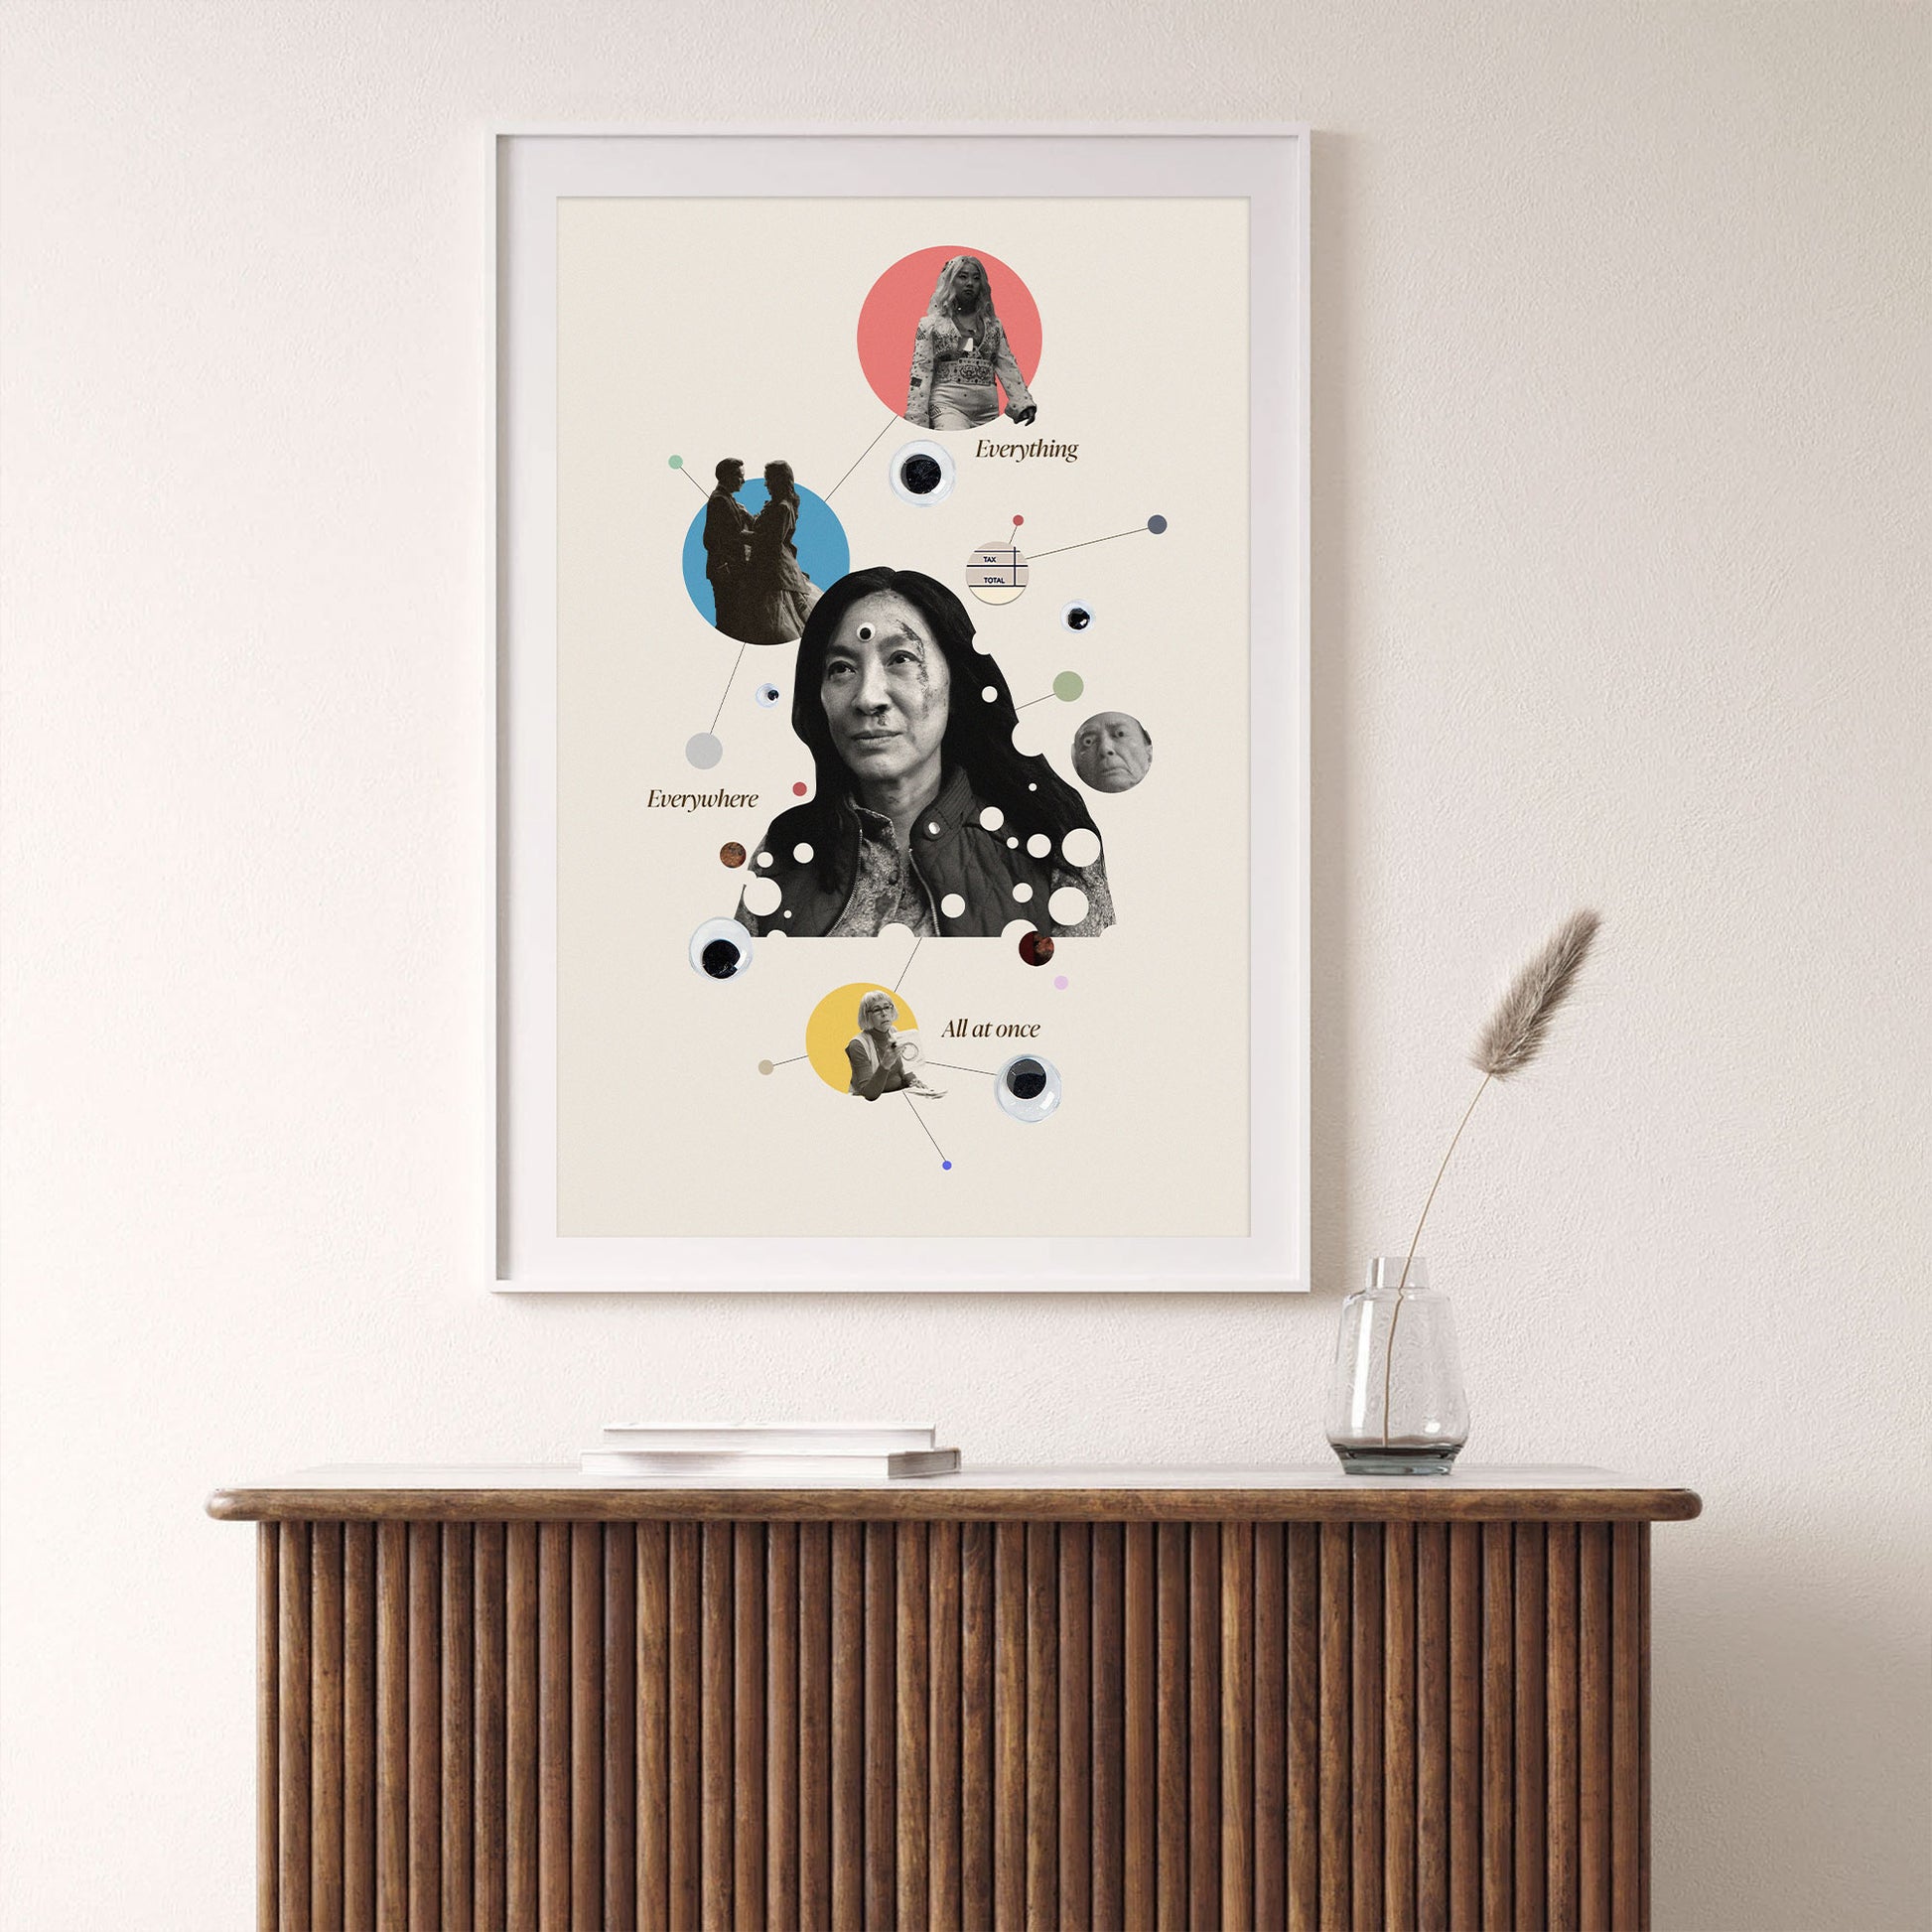 Everything Everywhere All At Once - Print Arts - a24, alternative movie poster, everything everywhere all at once, film poster, Ke Huy Quan, Michelle Yeoh, mid century movie, minimalist poster, movie artwork, movie poster, poster, redesigned movie poster, Stephanie Hsu